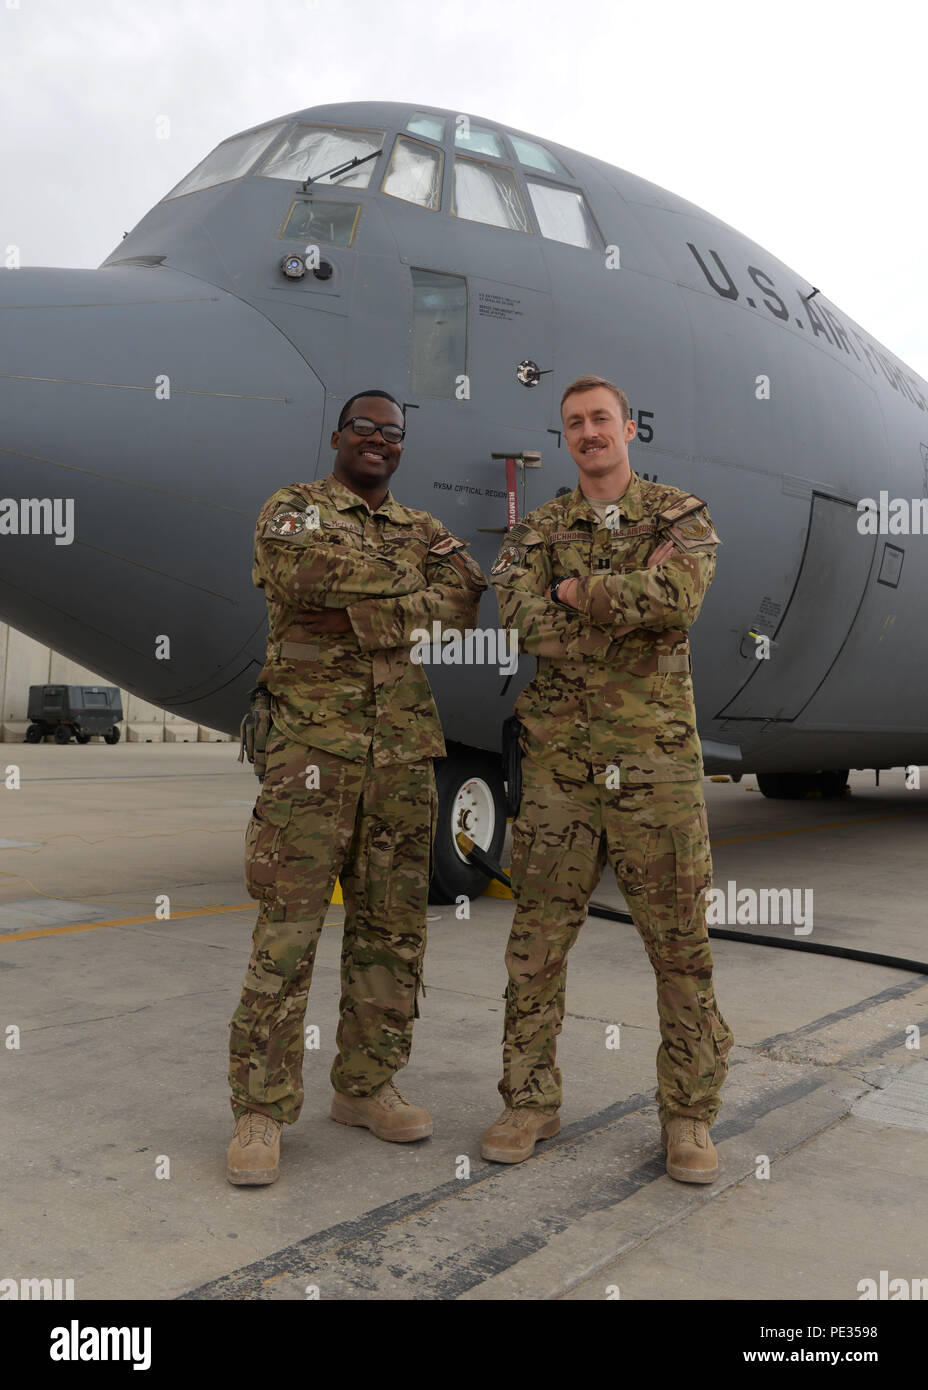 U.S. Air Force Capt.’s Boston McClain and Matt Buchholtz, 774th Expeditionary Airlift Squadron C-130J Super Hercules pilots, pose for a photo Sep. 4, 2015, at Bagram Air Field, Afghanistan. The pilots are responsible for transporting mission essential assets as well as passengers to various forward operating bases throughout Afghanistan. (U.S. Air Force photo by Senior Airman Cierra Presentado/Released) Stock Photo